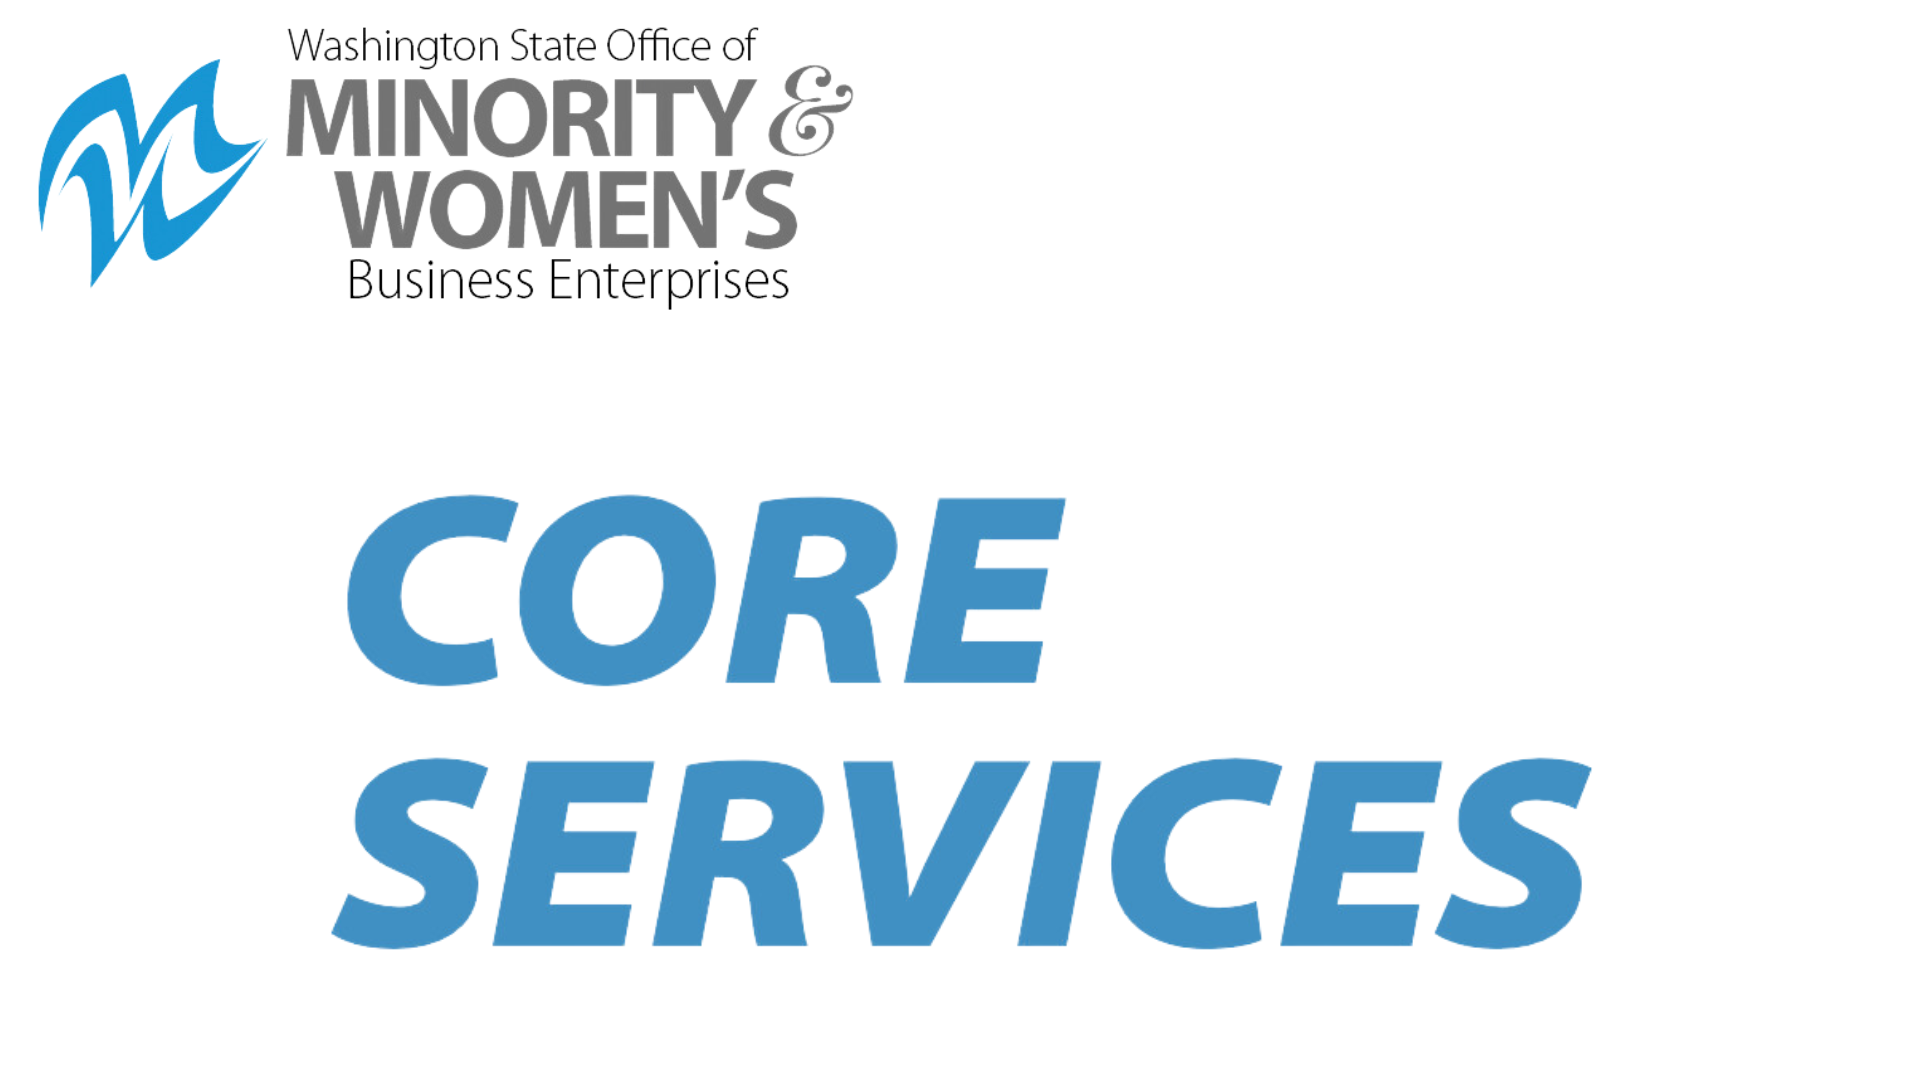 Graphic titled 'Core Services' from the Washington State Office of Minority & Women's Business Enterprises. The image includes the logo of the Washington State Office of Minority & Women's Business Enterprises and highlights the core services provided by the organization.